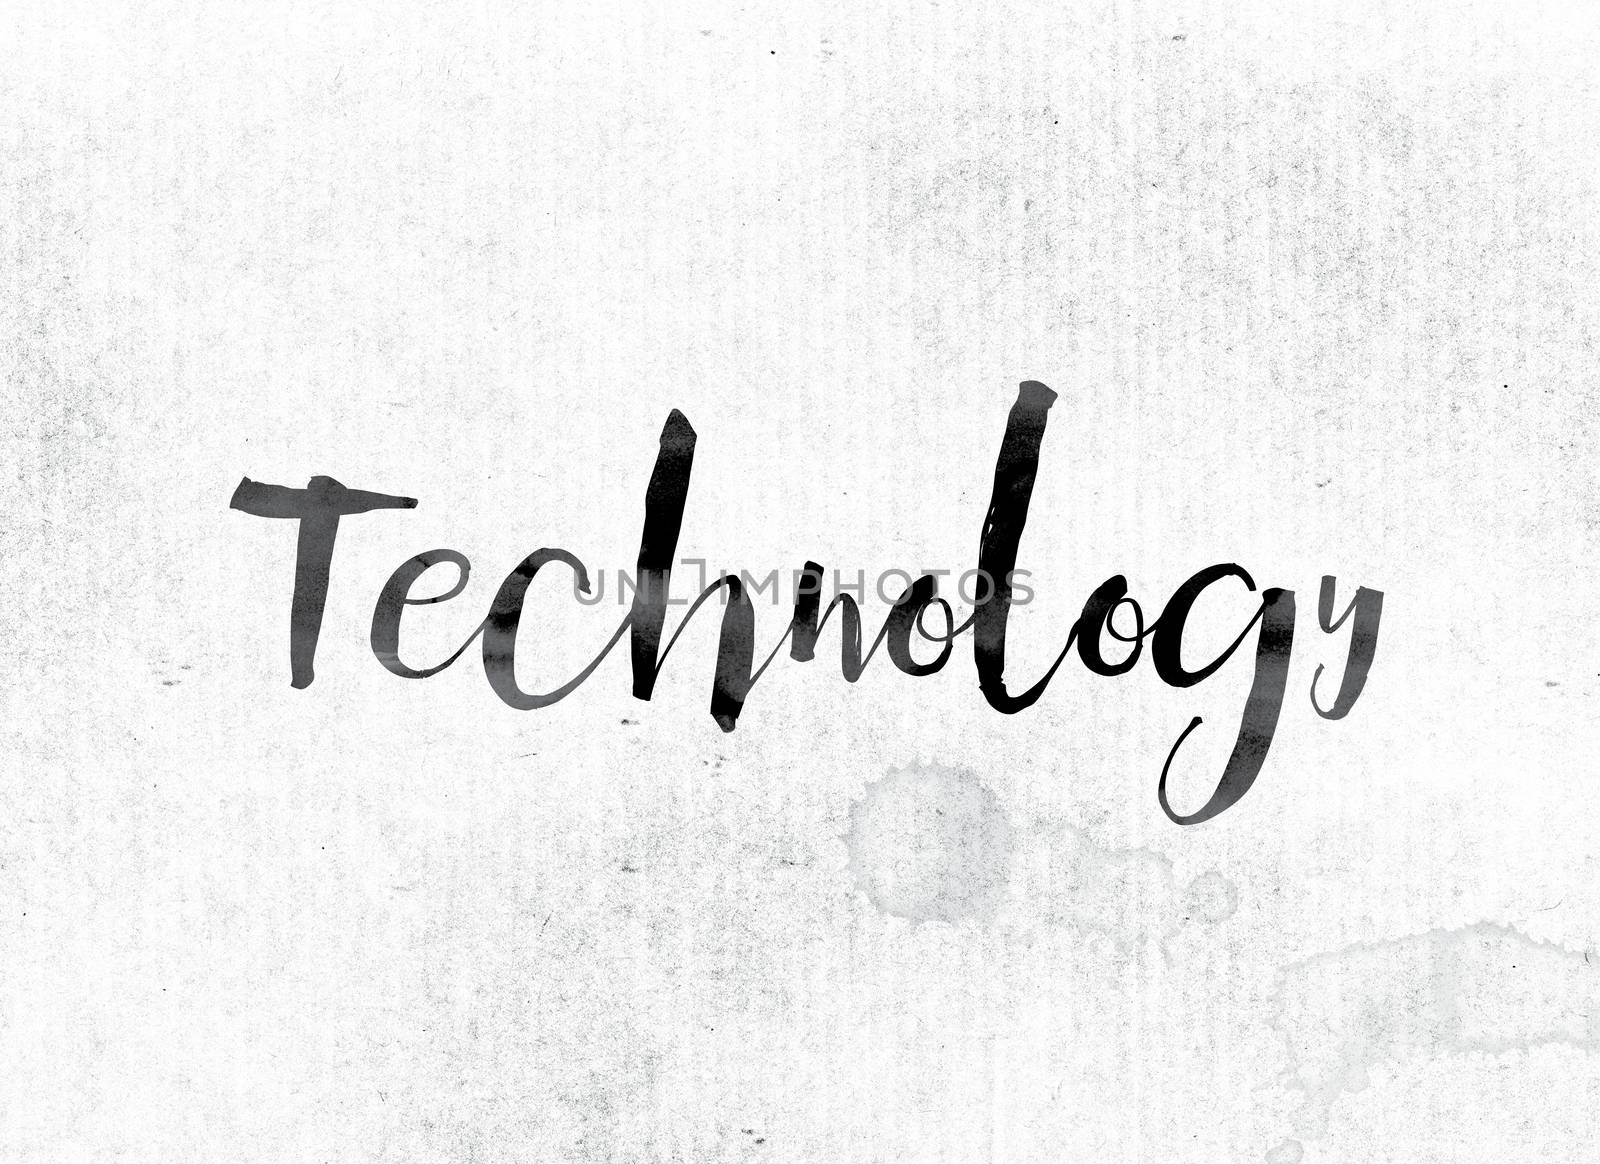 The word "Technology" concept and theme painted in watercolor ink on a white paper.